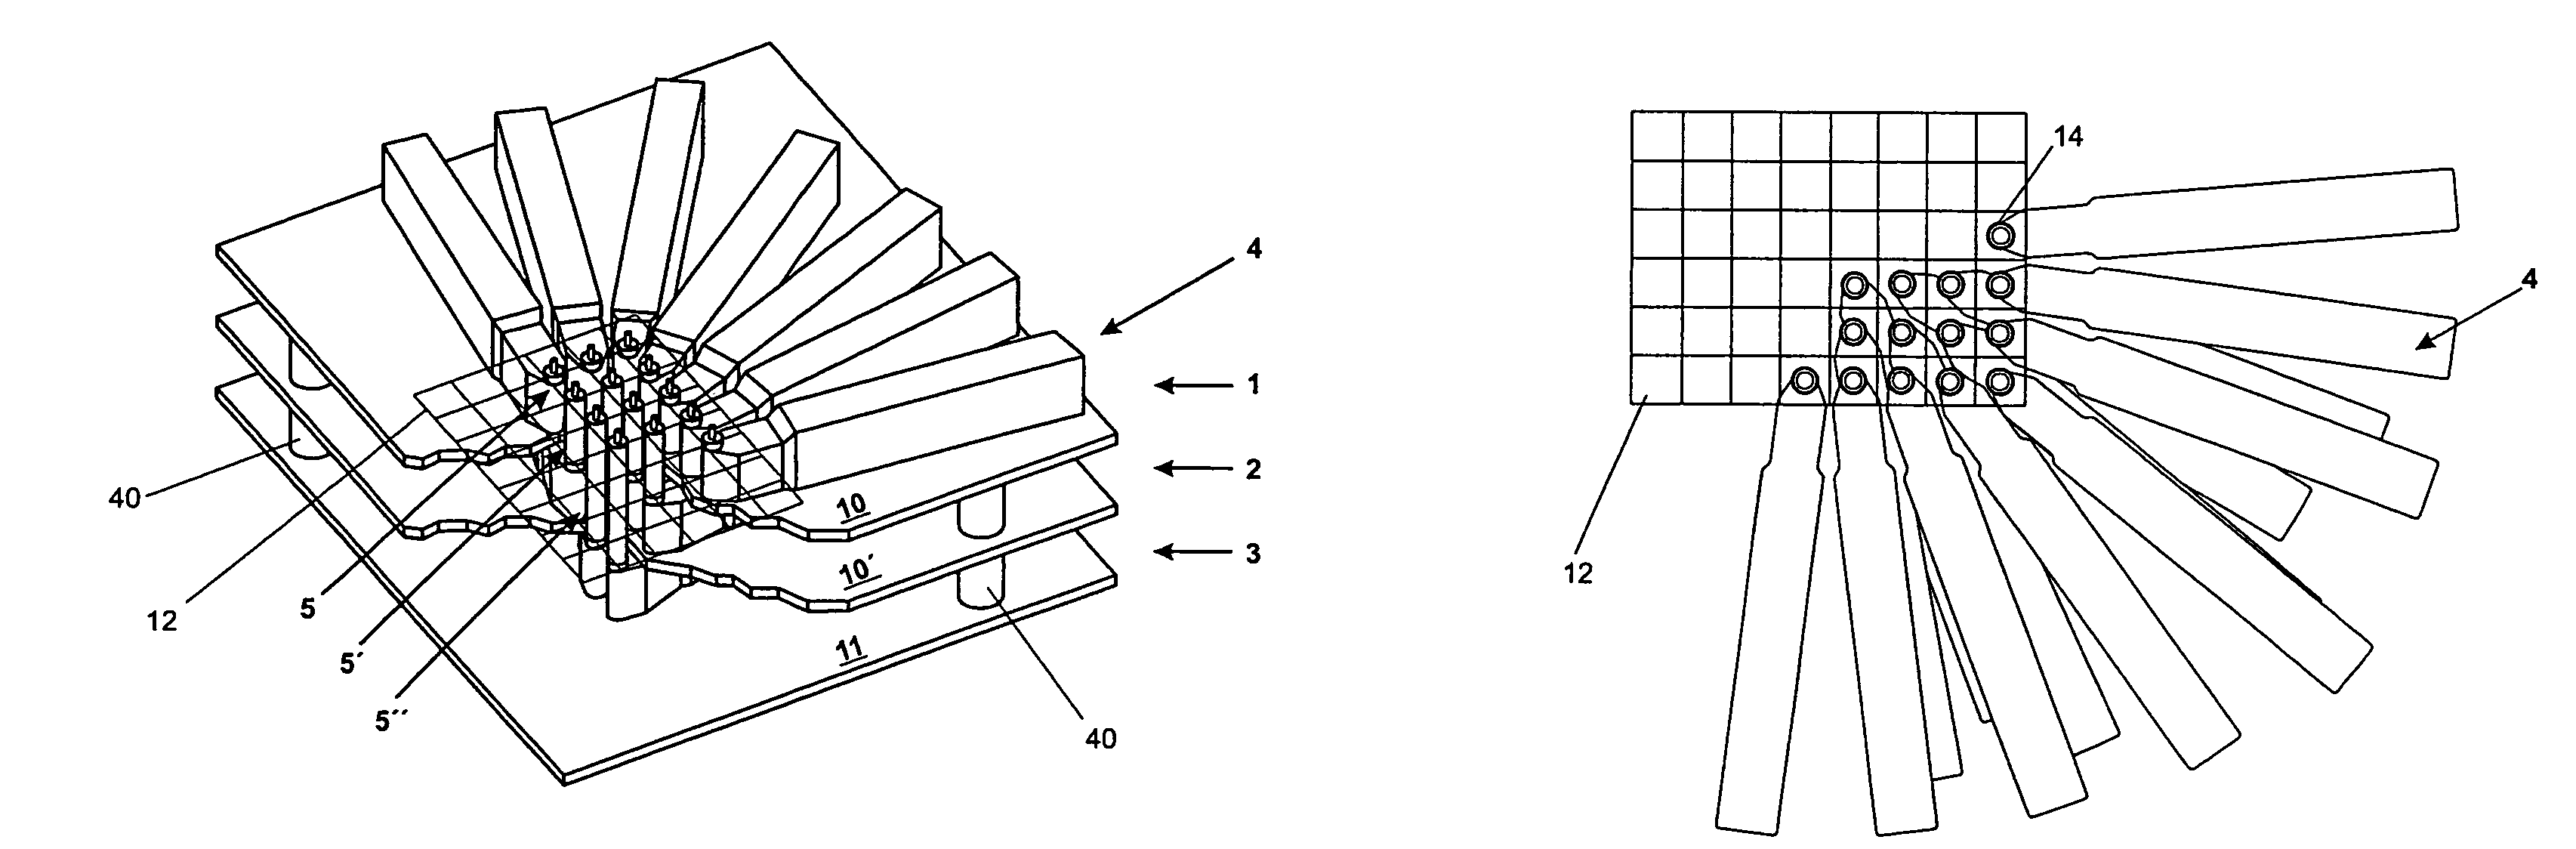 Device for weighing substantially uniform weighing objects